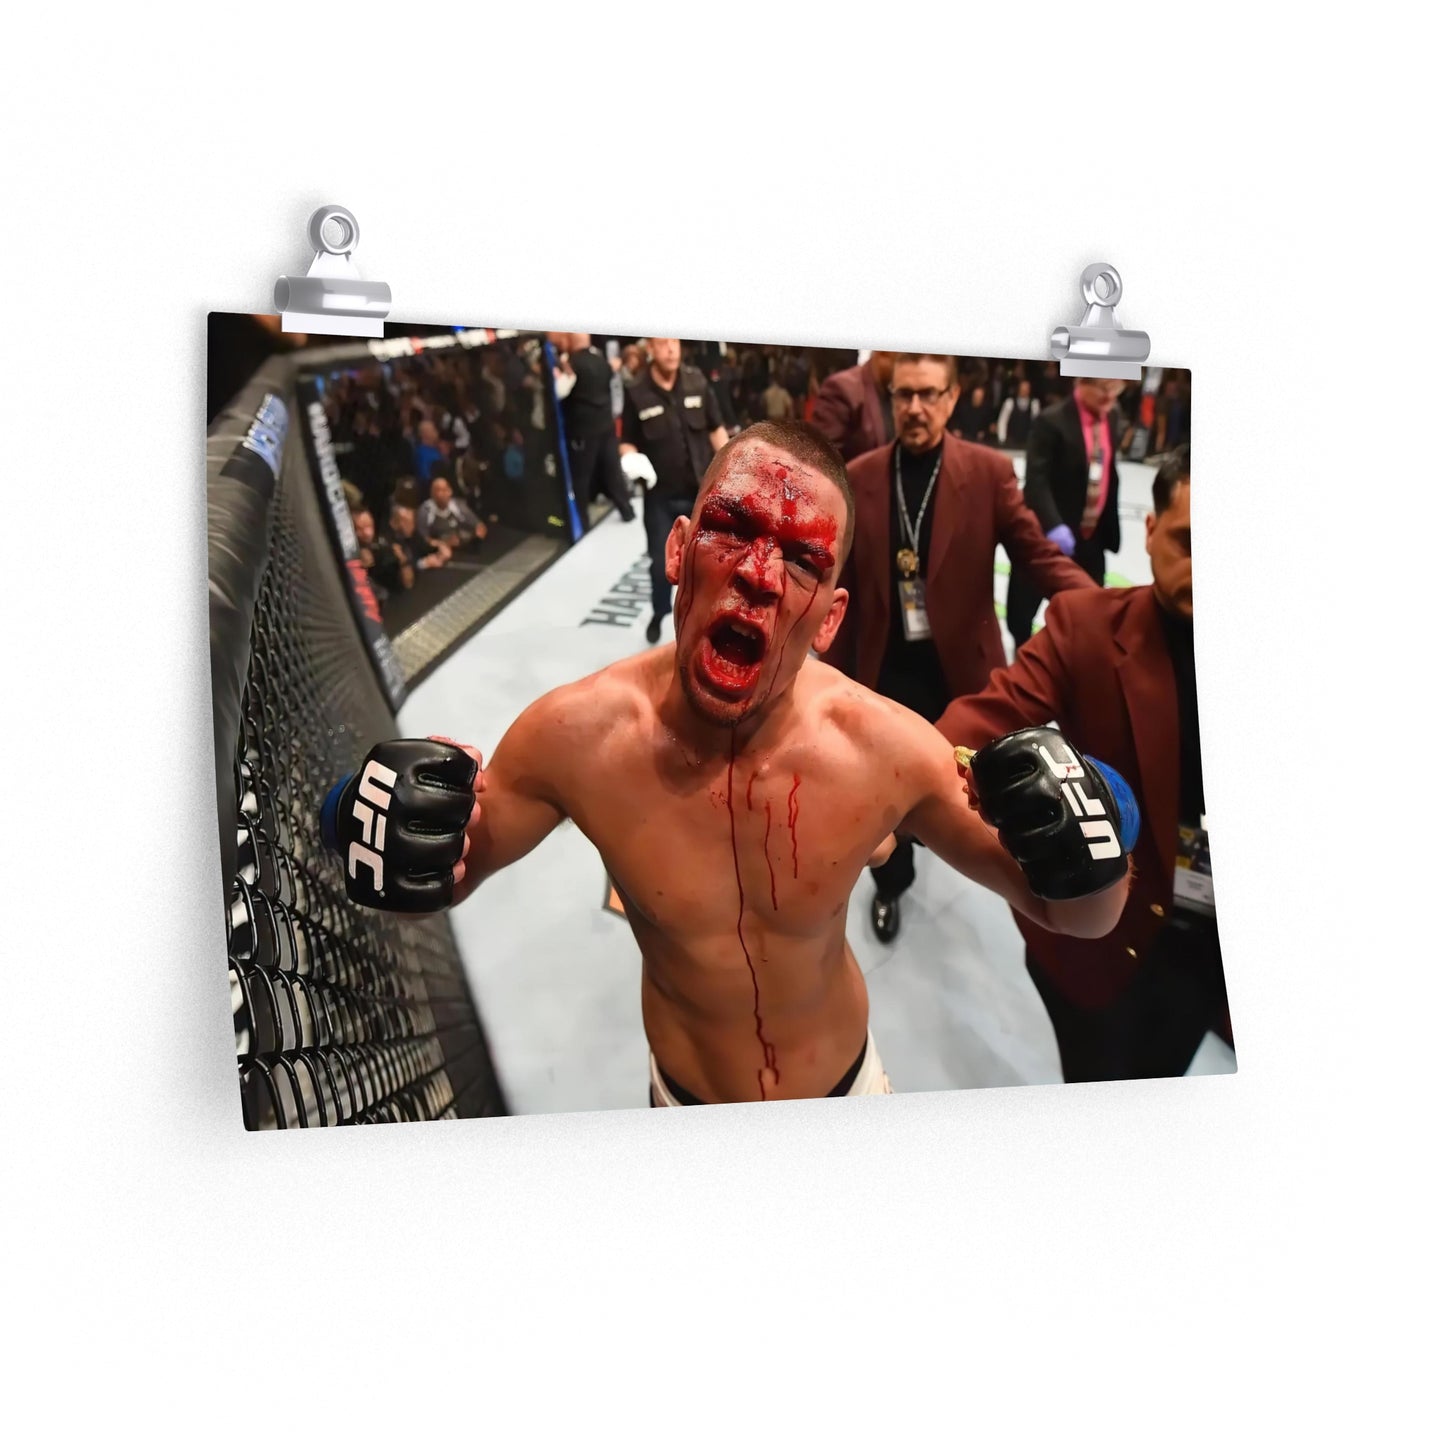 Nate Diaz Flexing Bleeding At Camera After Beating Conor McGregor Poster